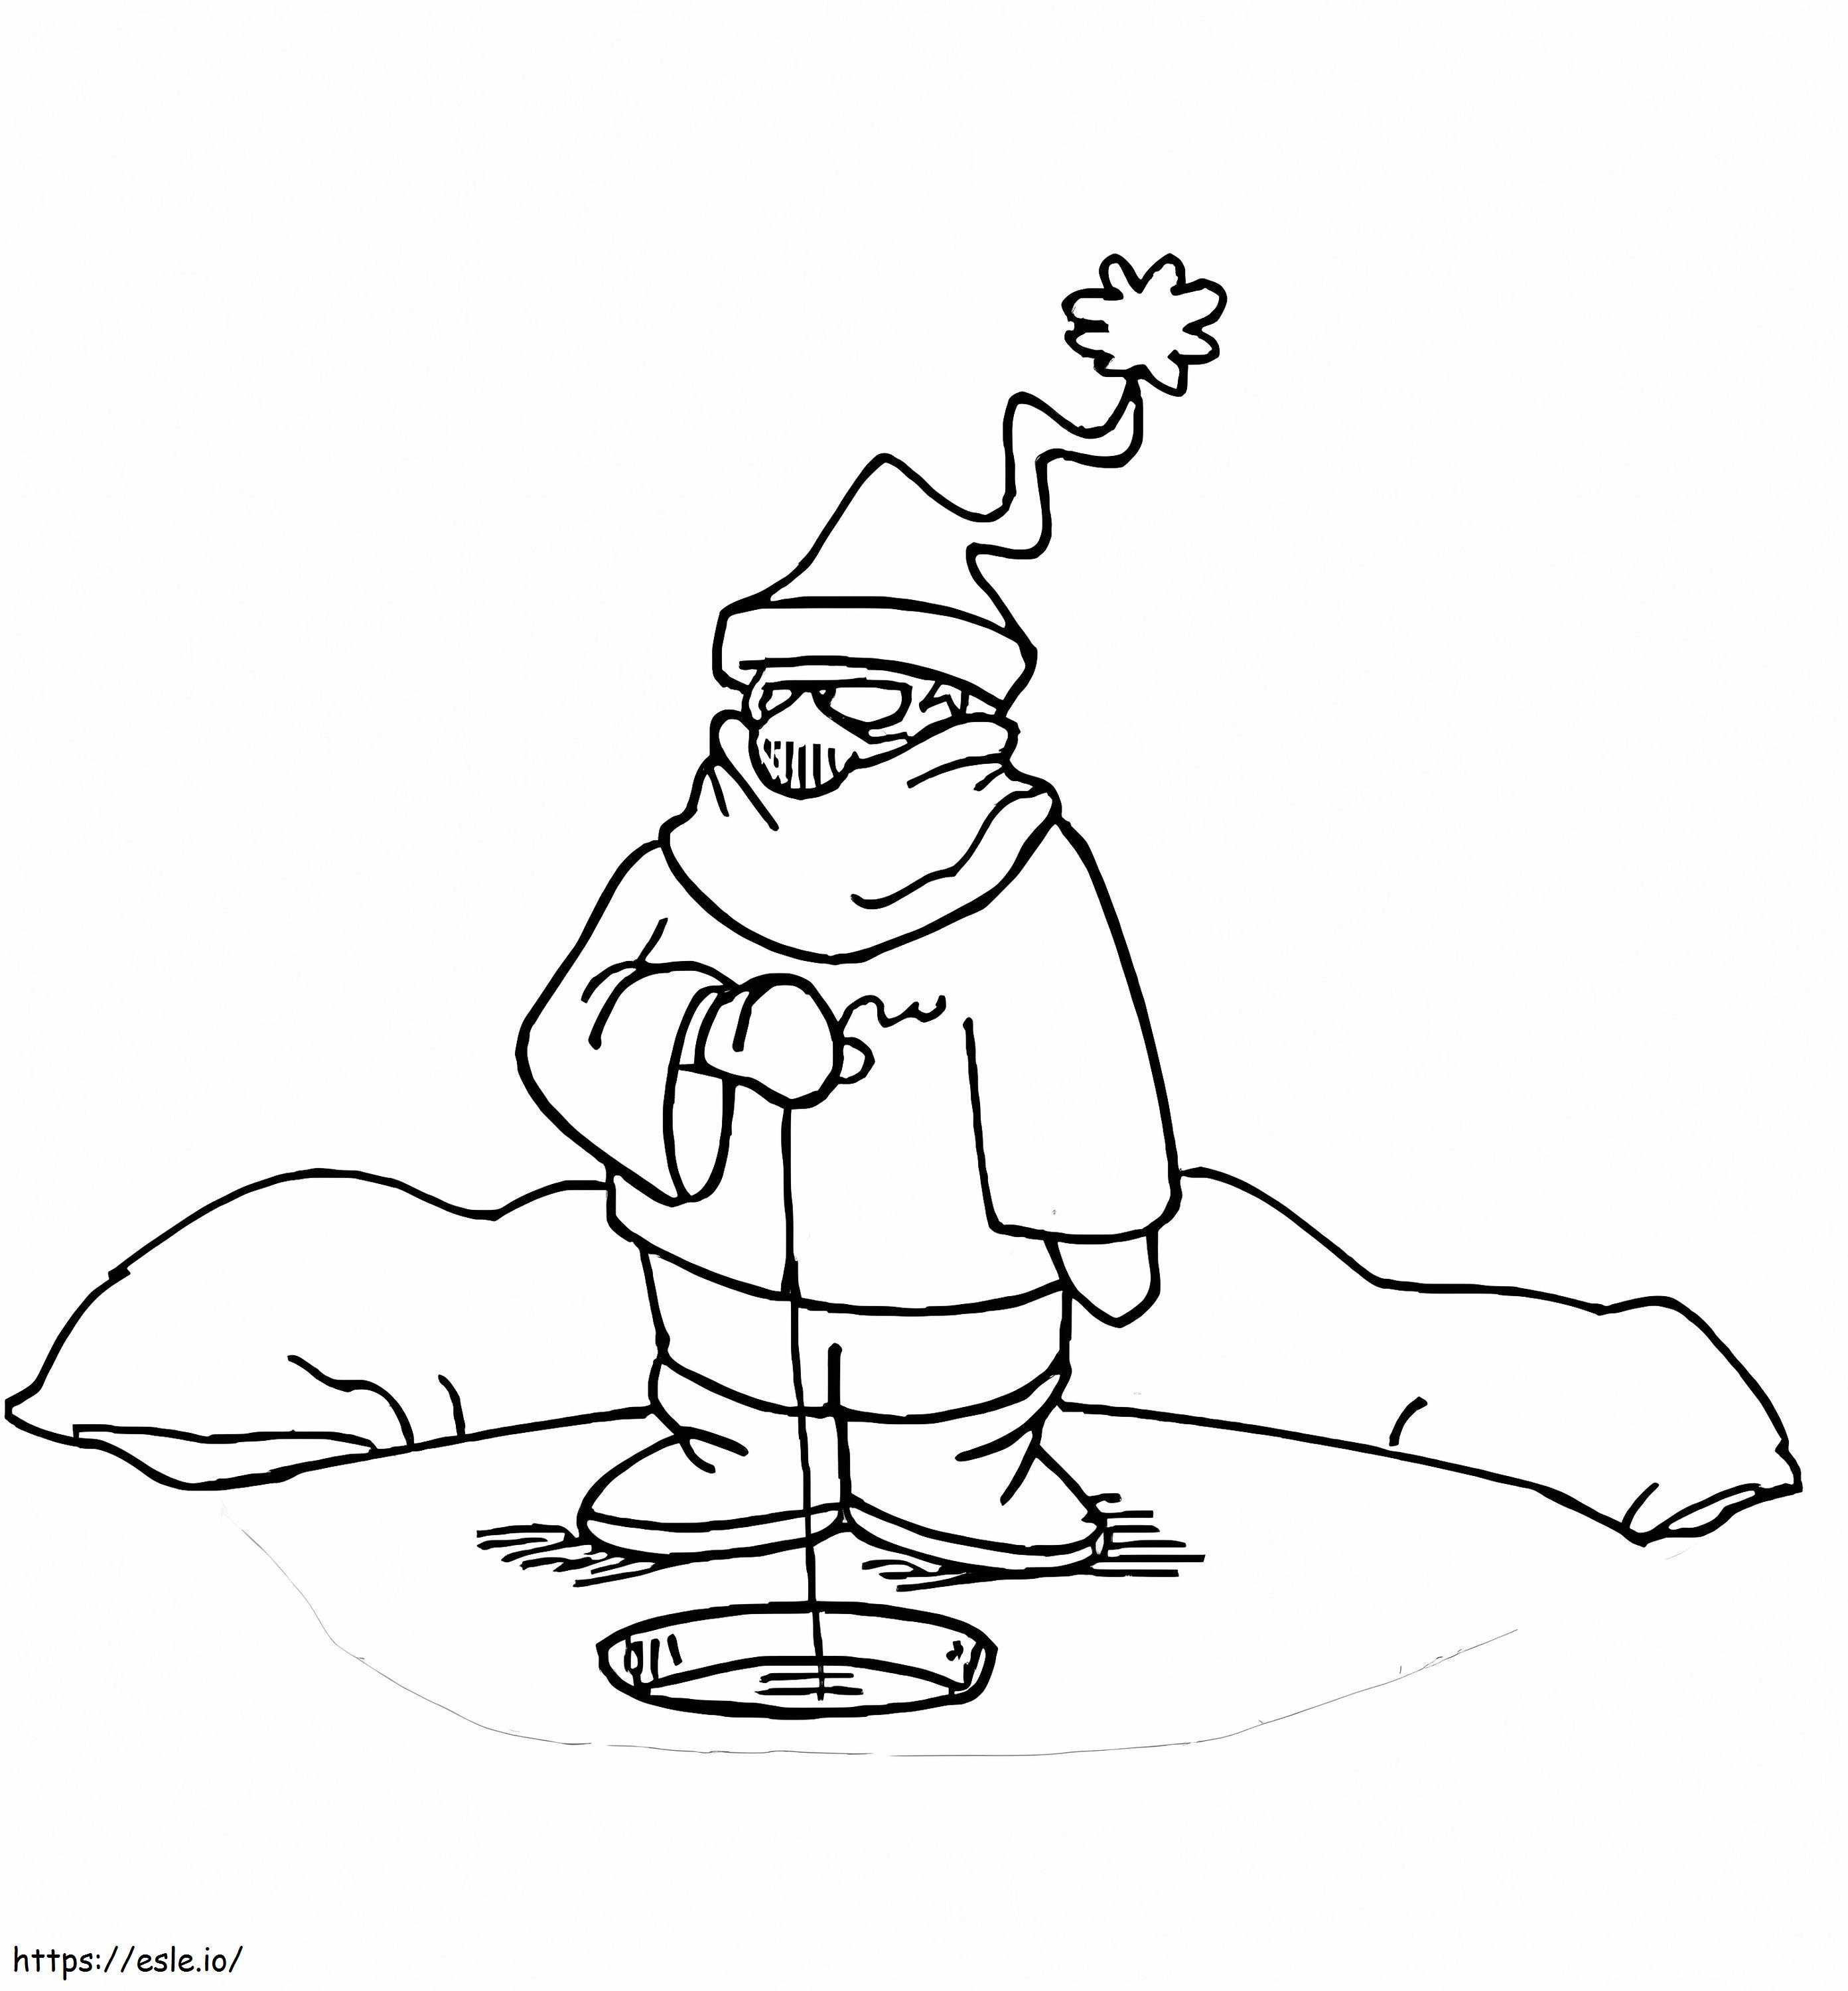 Fishing In Canada coloring page